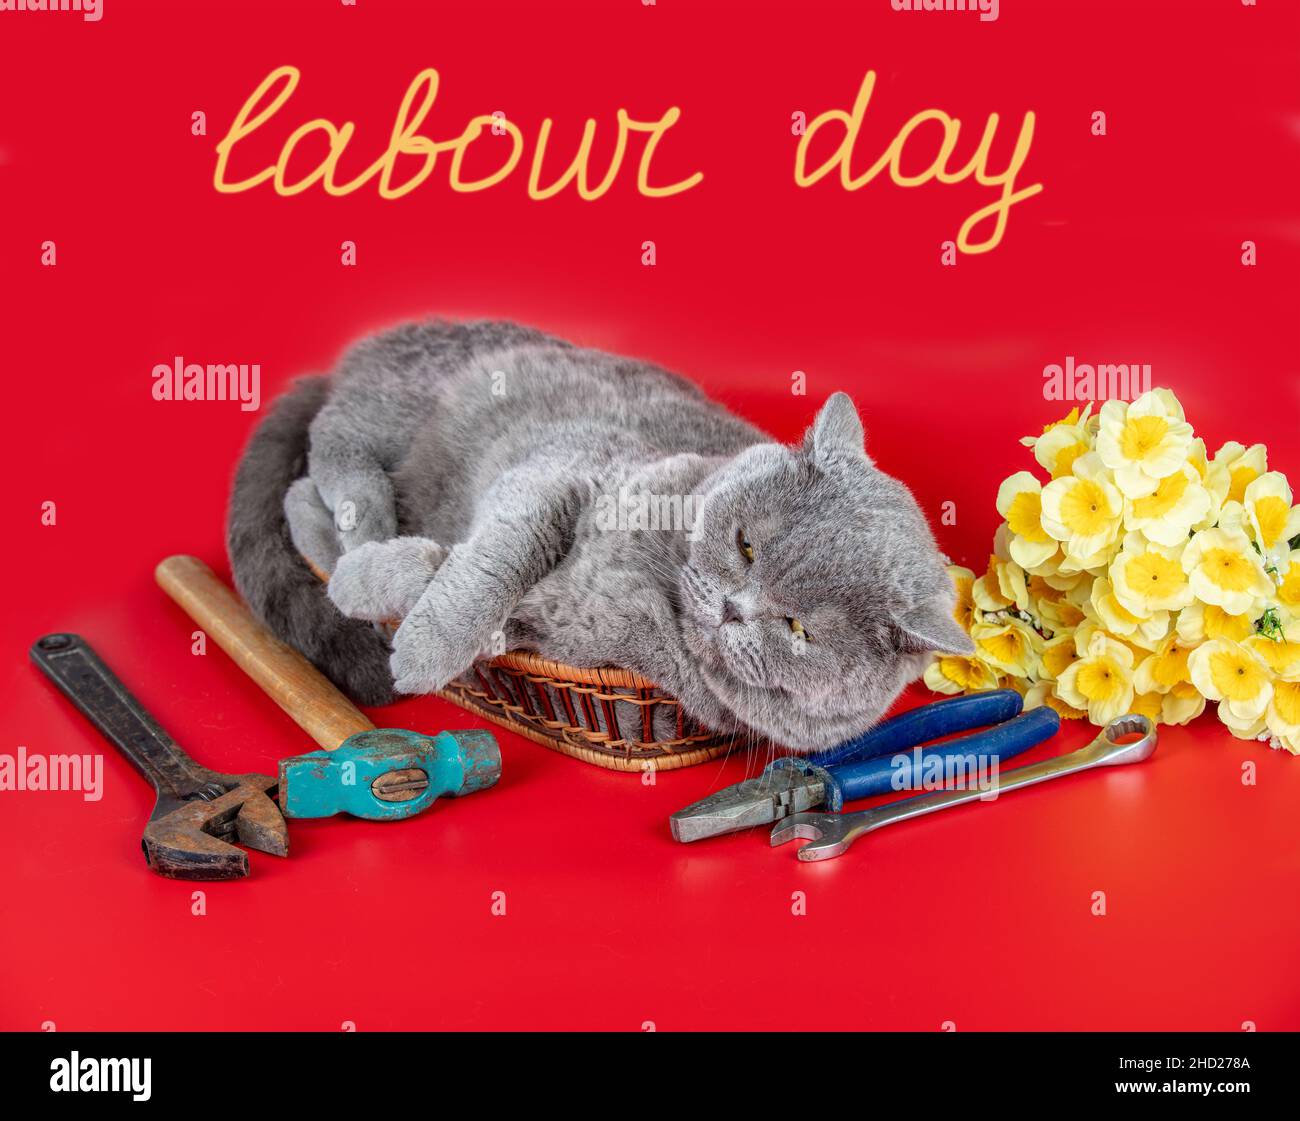 Greeting from funny Blue british shorthair relaxing cat with International Labour day. The cat lying on red background with work tools and flowers Stock Photo